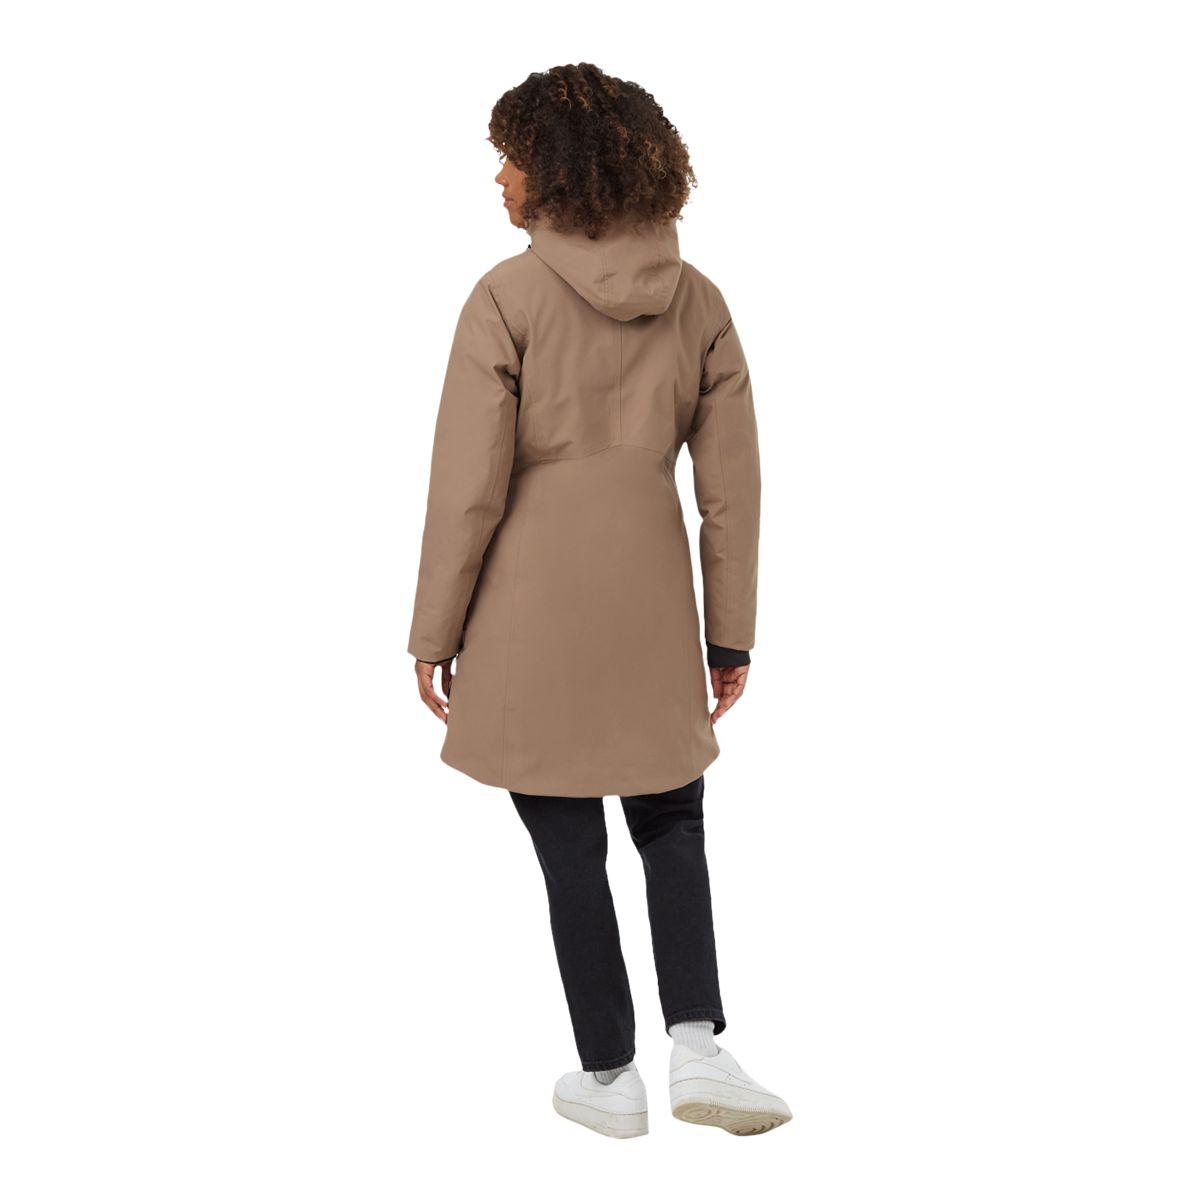 https://media-www.sportchek.ca/product/div-03-softgoods/dpt-76-outerwear/sdpt-02-womens/334192522/tentree-w-daily-parka-f23-0923-fossil-b0785f26-239d-4f46-9047-6104d38544d5-jpgrendition.jpg?imdensity=1&imwidth=1244&impolicy=mZoom